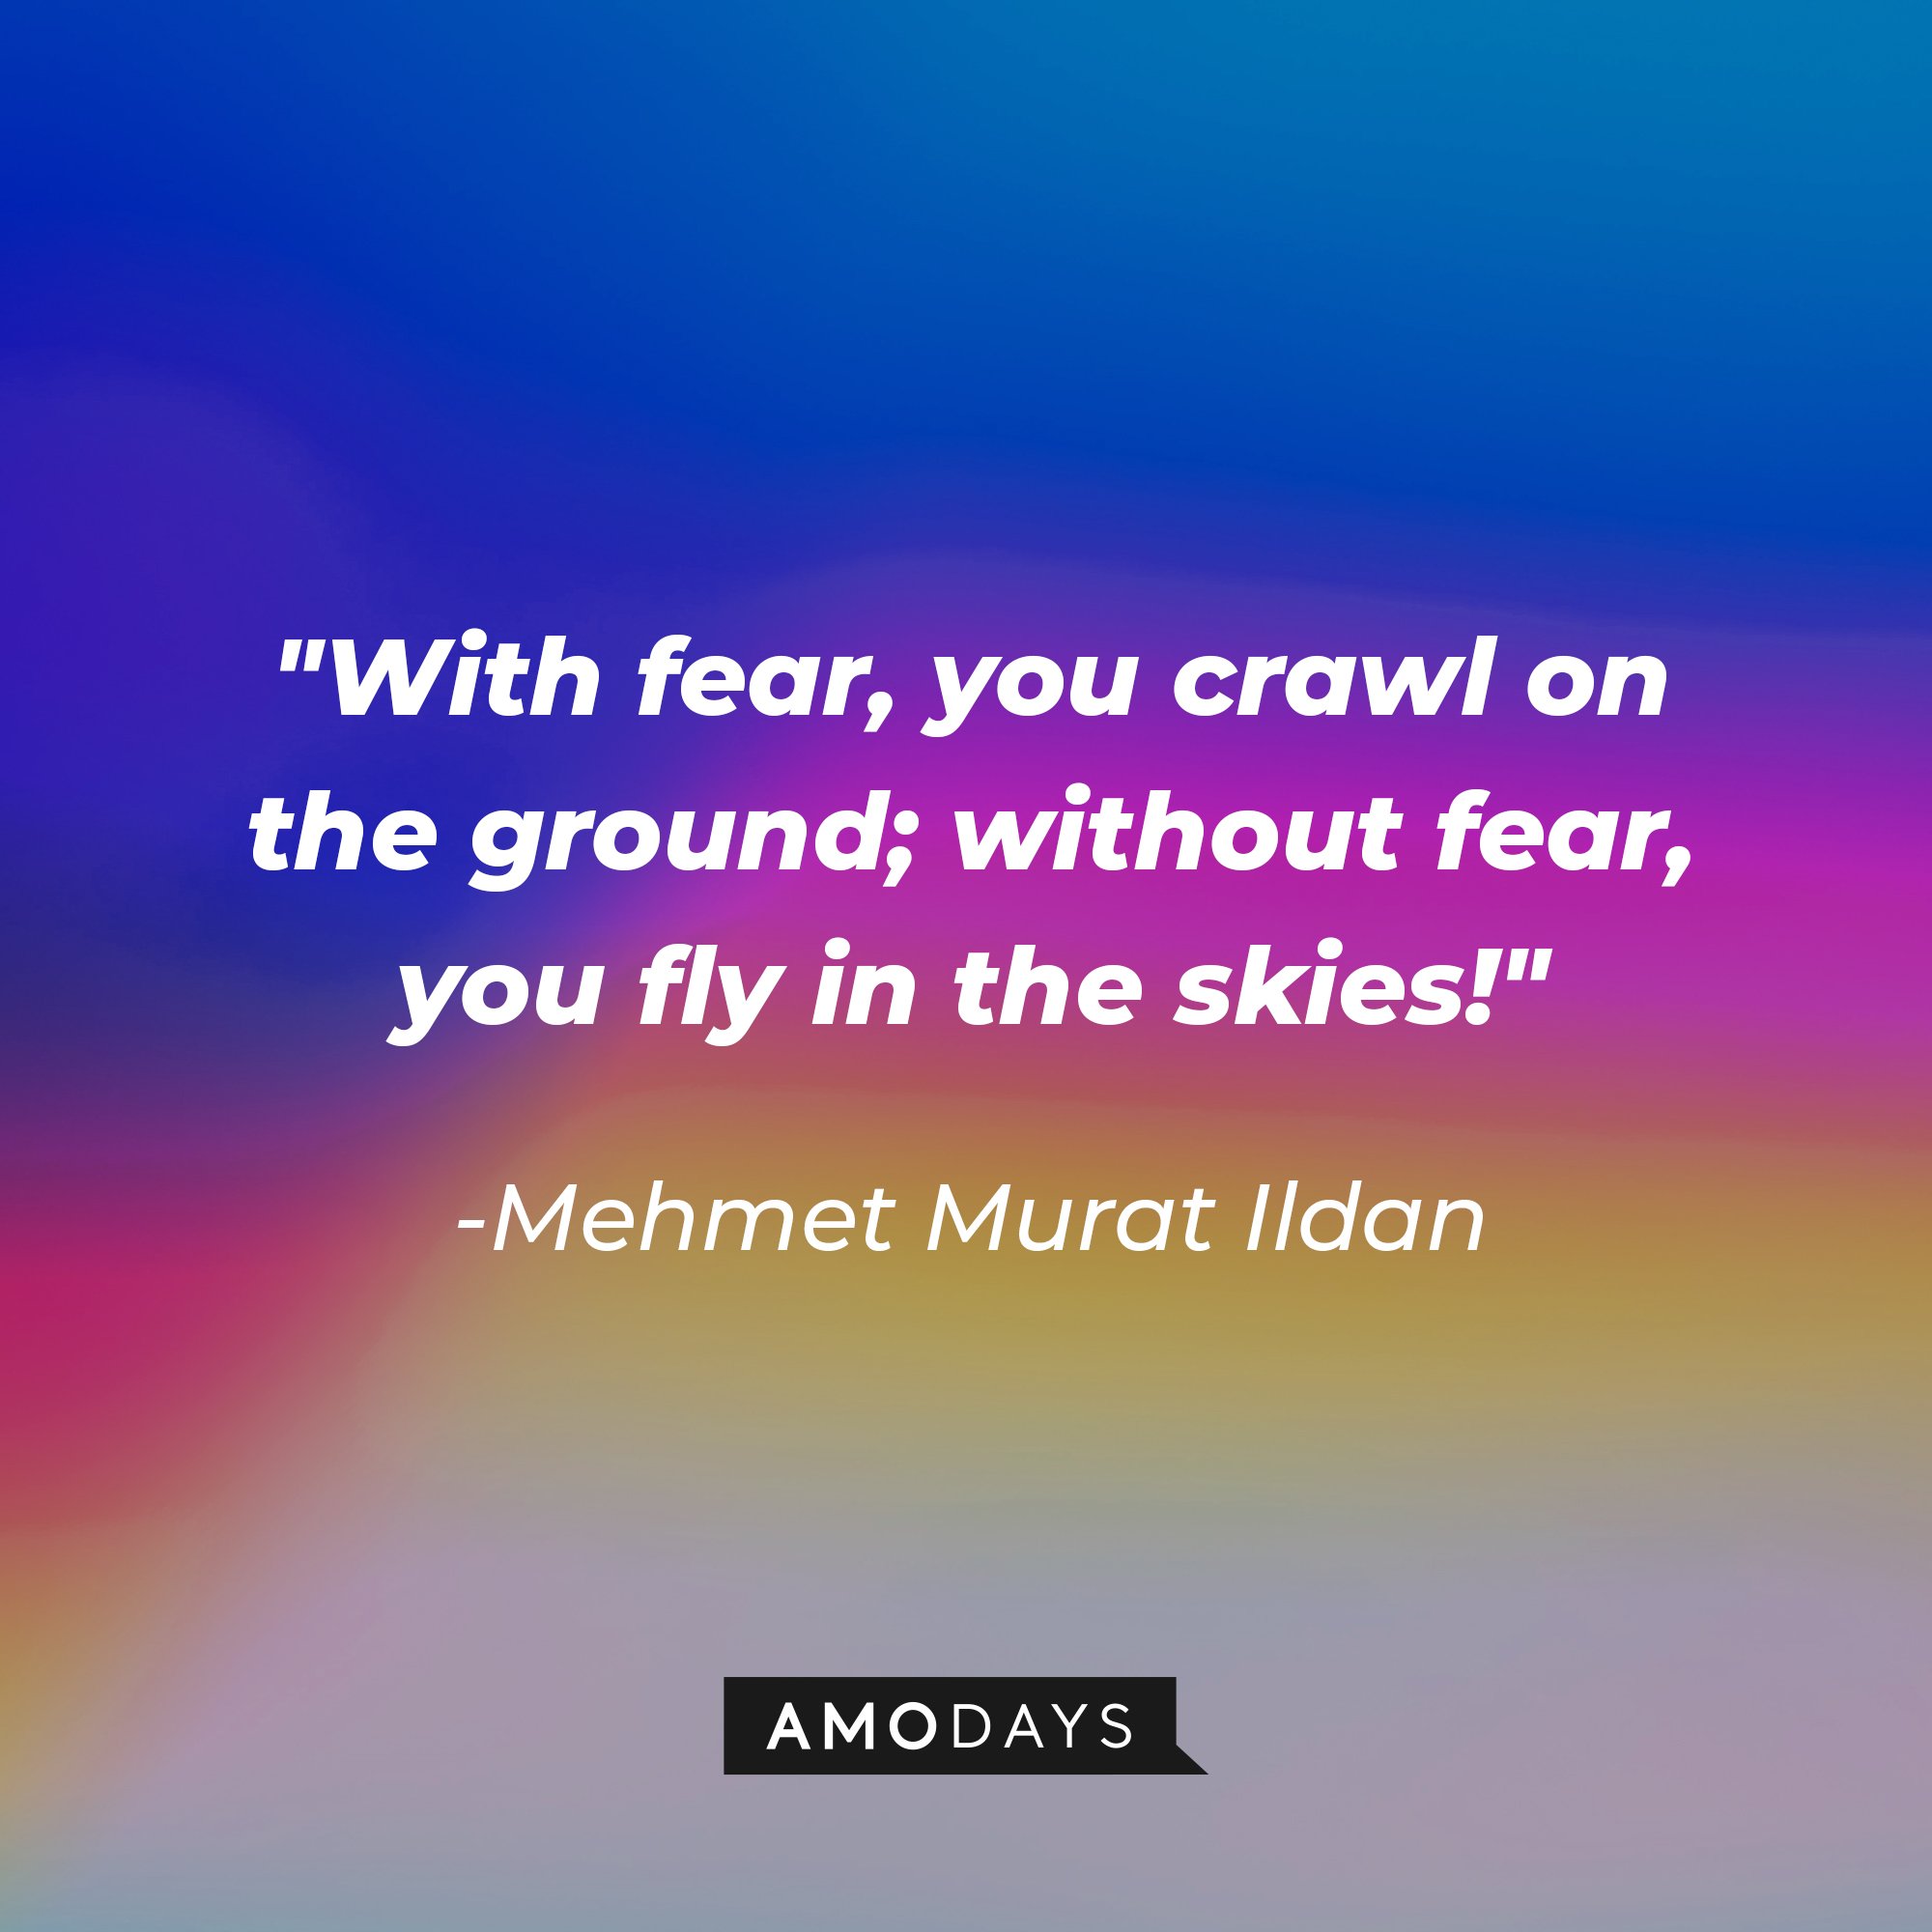 Mehmet Murat Ildan’s quote: "With fear, you crawl on the ground; without fear, you fly in the skies!" | Image: AmoDays